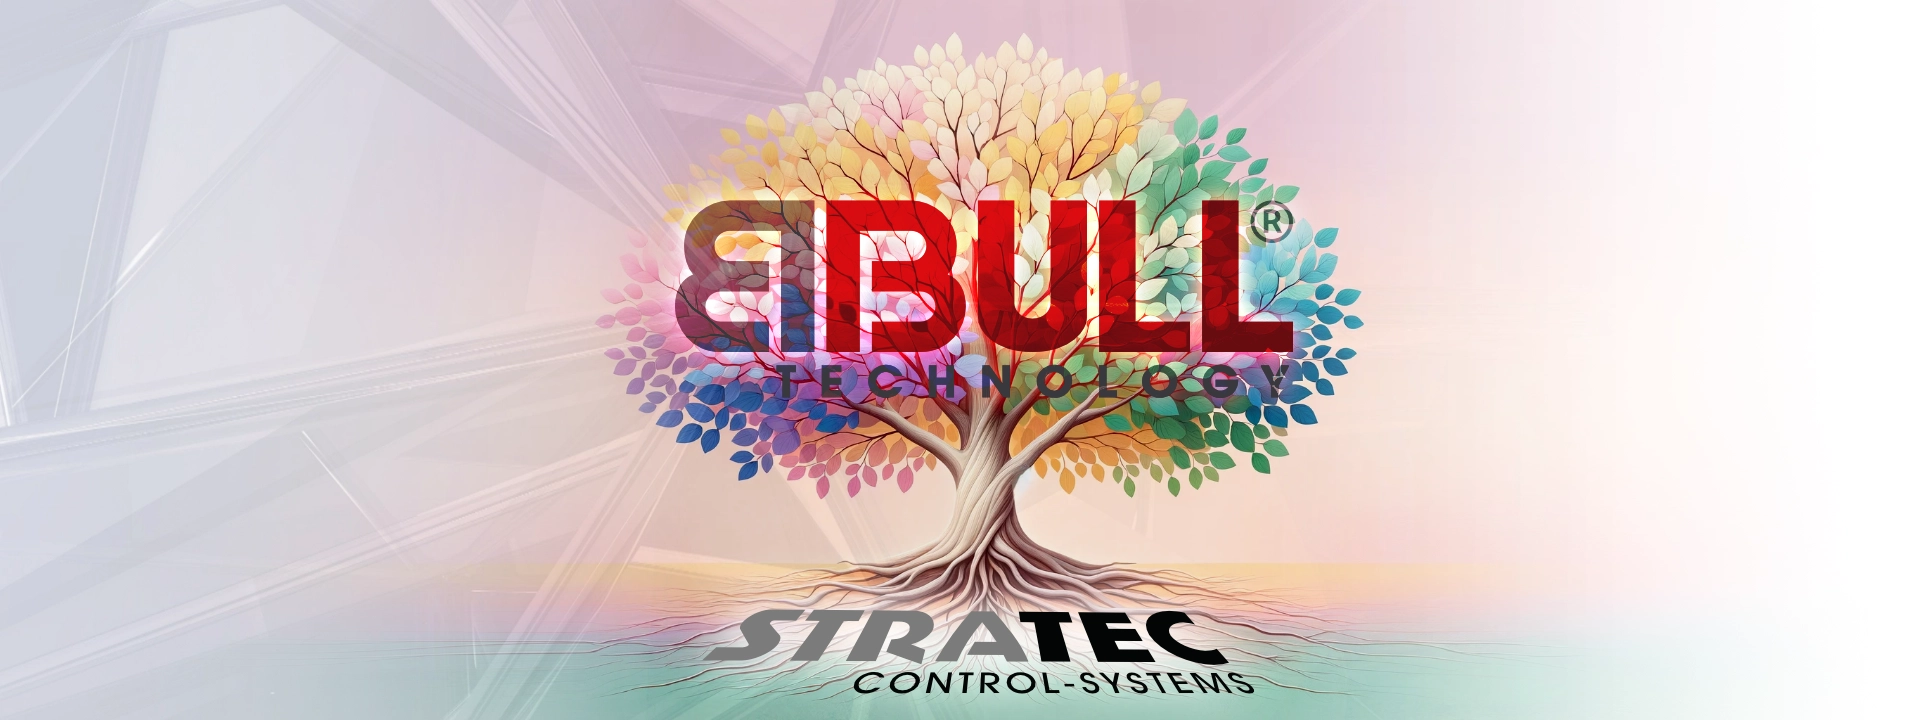 Embarking on a New Journey: Stratec Control-Systems is Now BBULL Technology GmbH